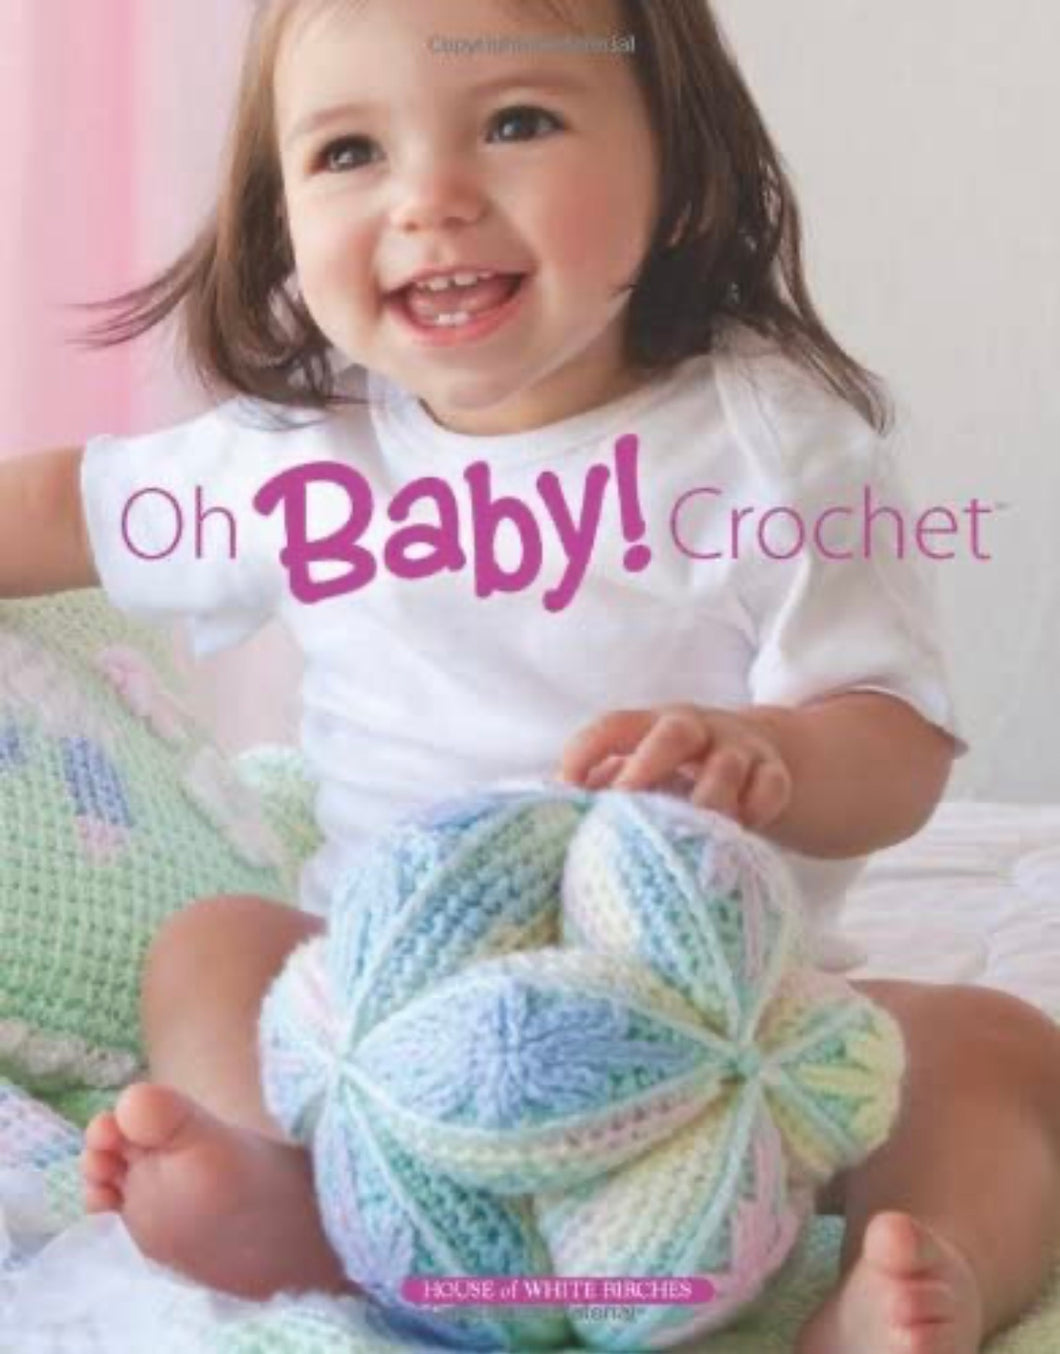 CROCHET BOOK:  Oh Baby! Crochet published by House of White Birches